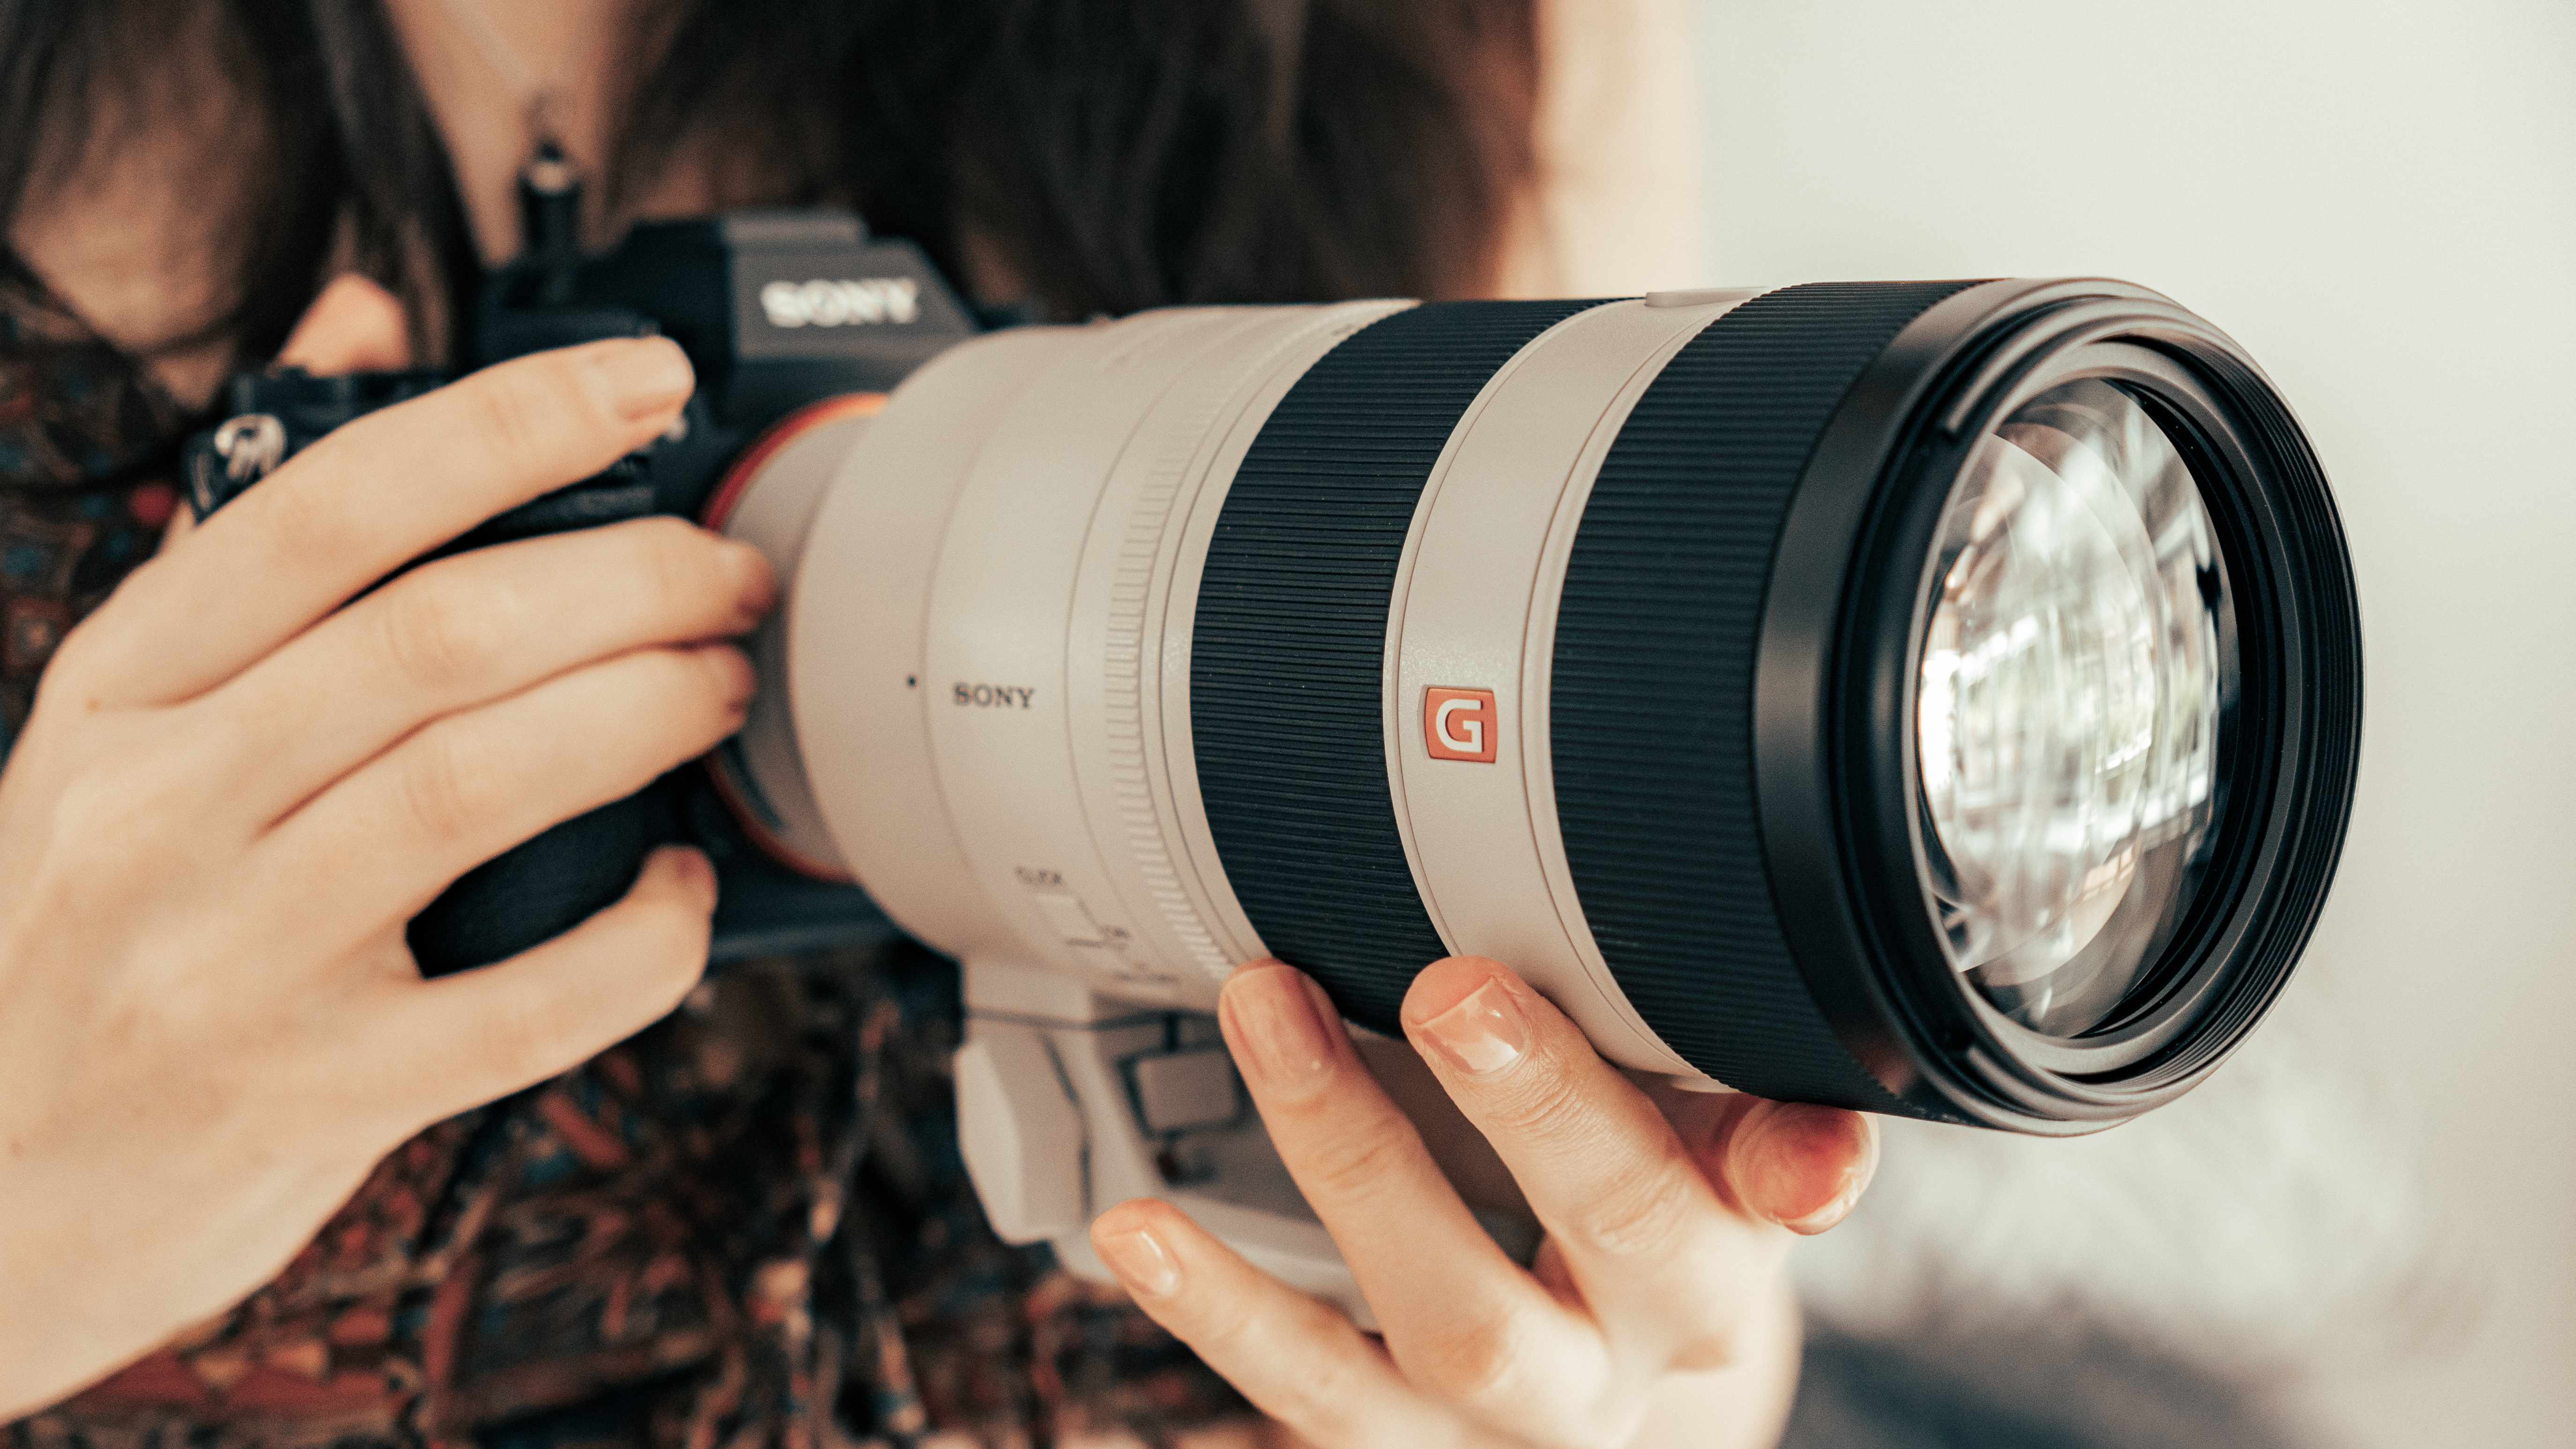 Sony FE 70-200mm f/2.8 GM OSS II Lens Review | Space